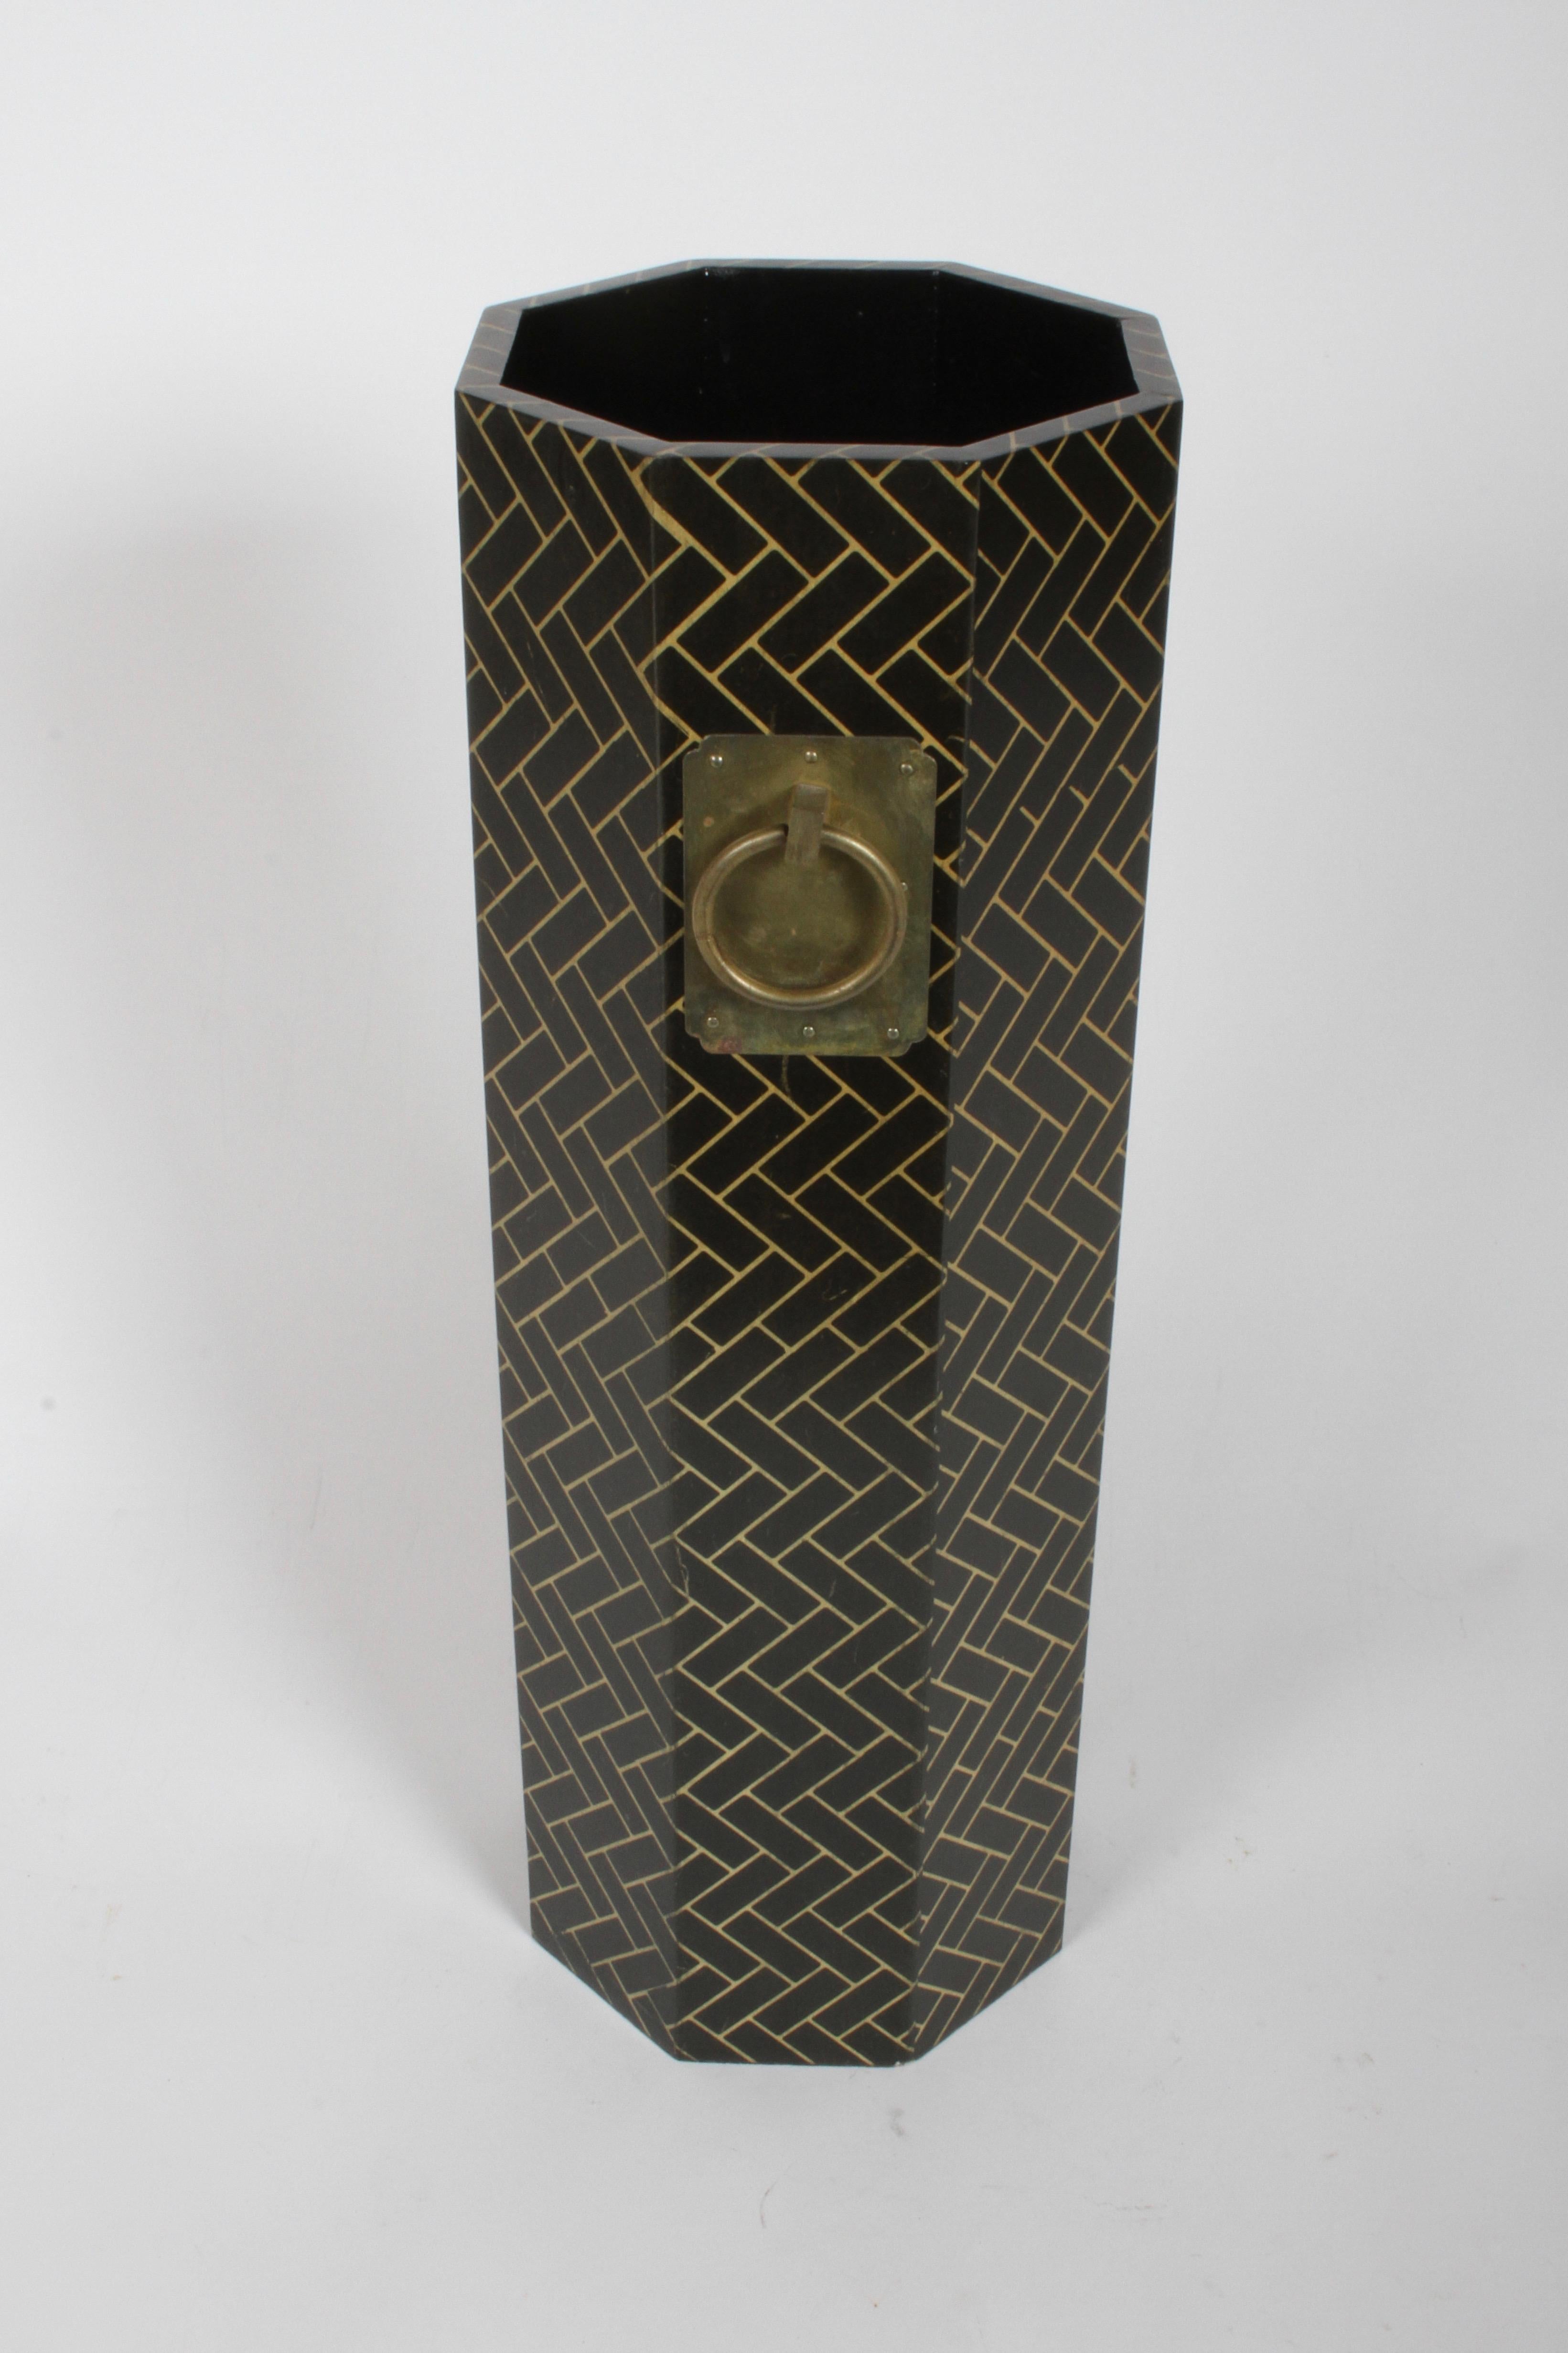 Late 1970s David Hicks influenced gold and black geometric patterned octagon form umbrella or cane stand with brass Asian style ring handles. In very nice original condition, some light scuffs.